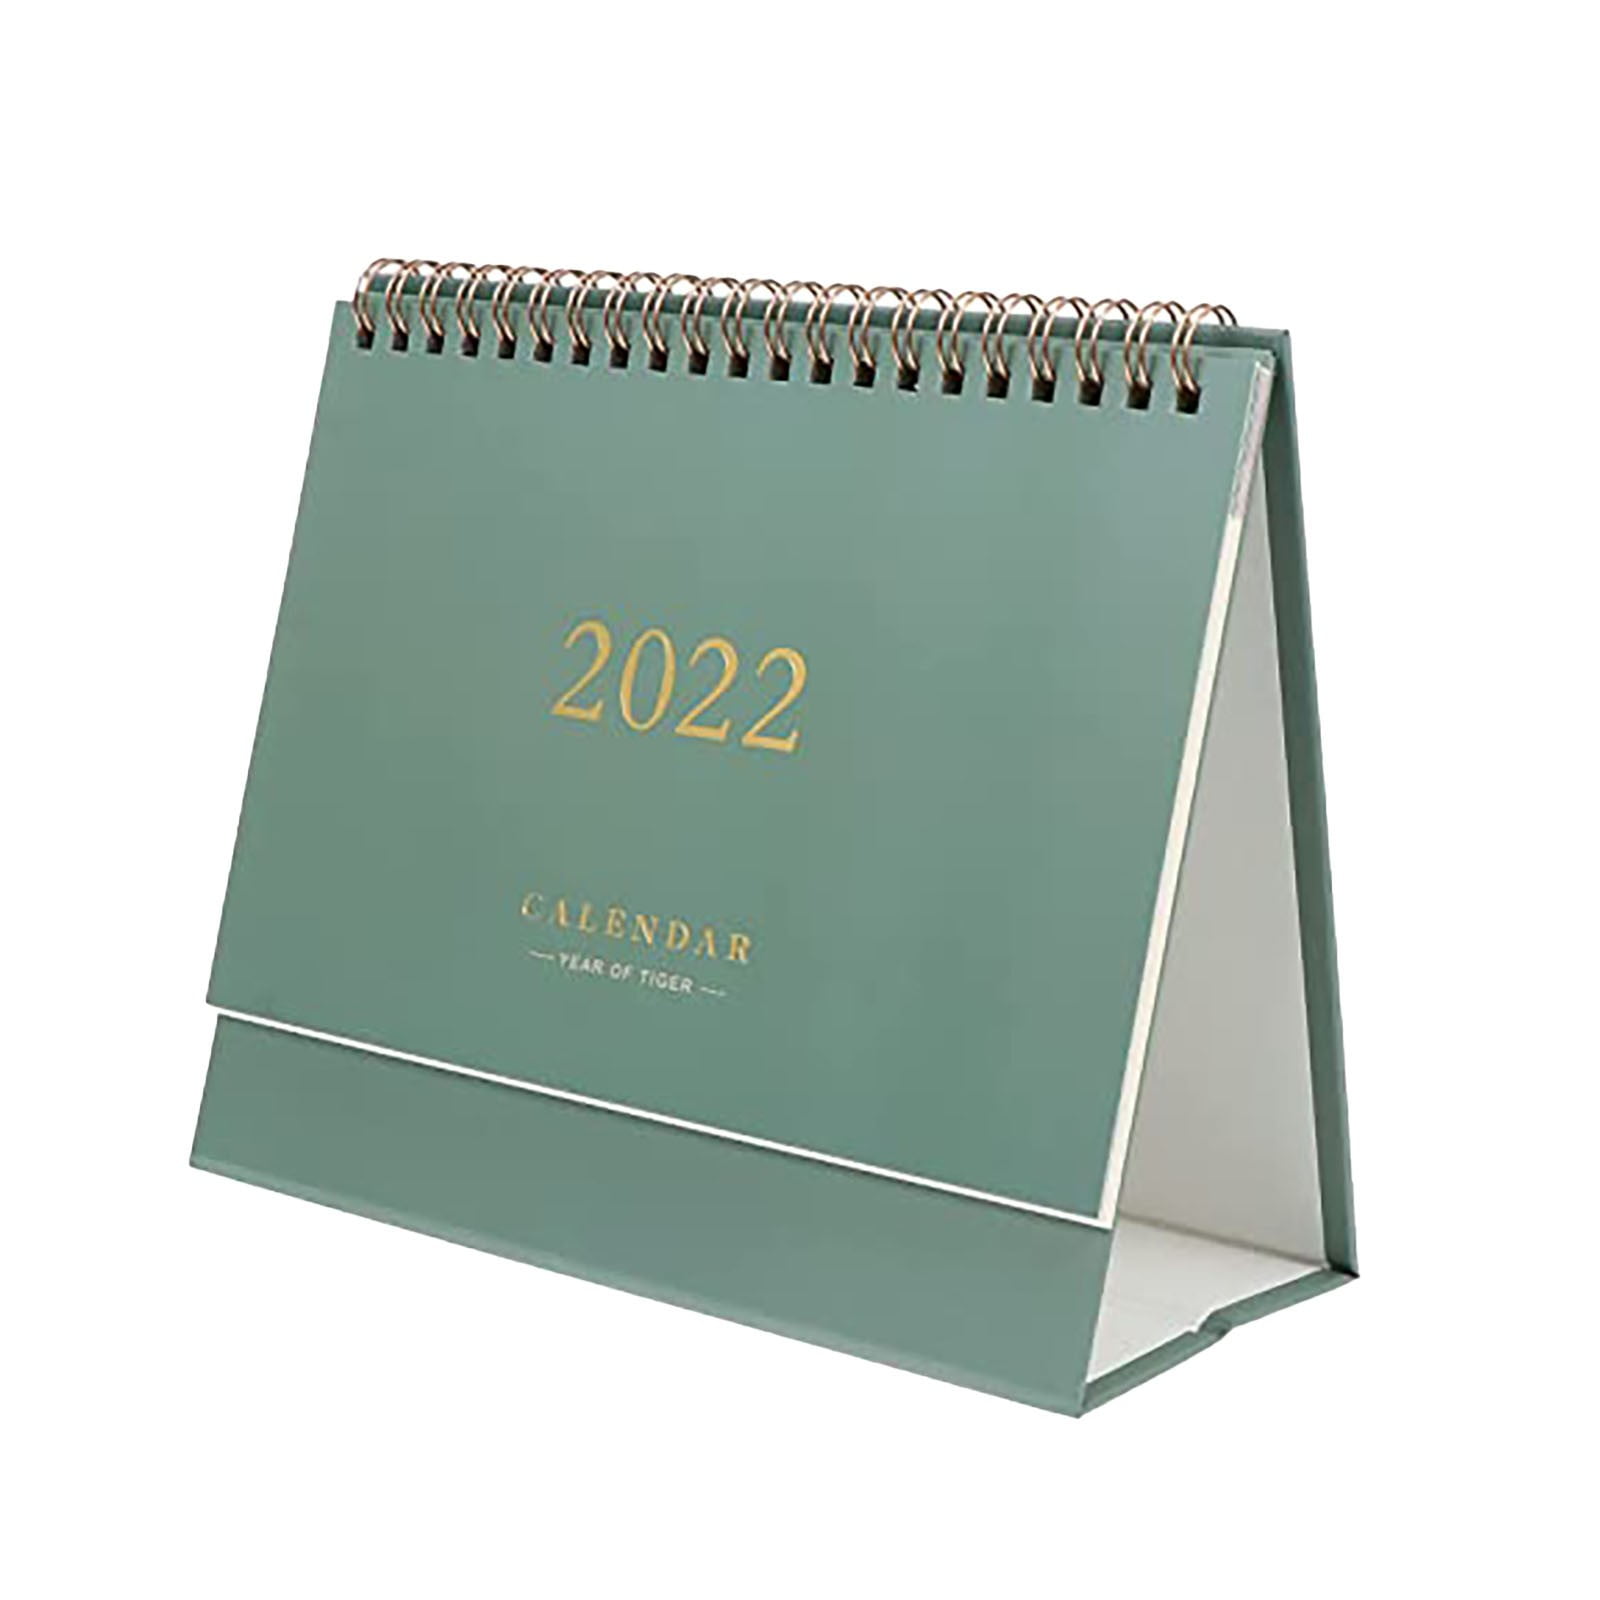 10 x 8.3 December 2023 July 2022 Small Desk Calendar 2022-2023 Standing Flip with Strong Twin-Wire Binding Desk Calendar 2022-2023 Standing Flip Desktop Calendar Memoranda Lined Pages with Thick Paper 